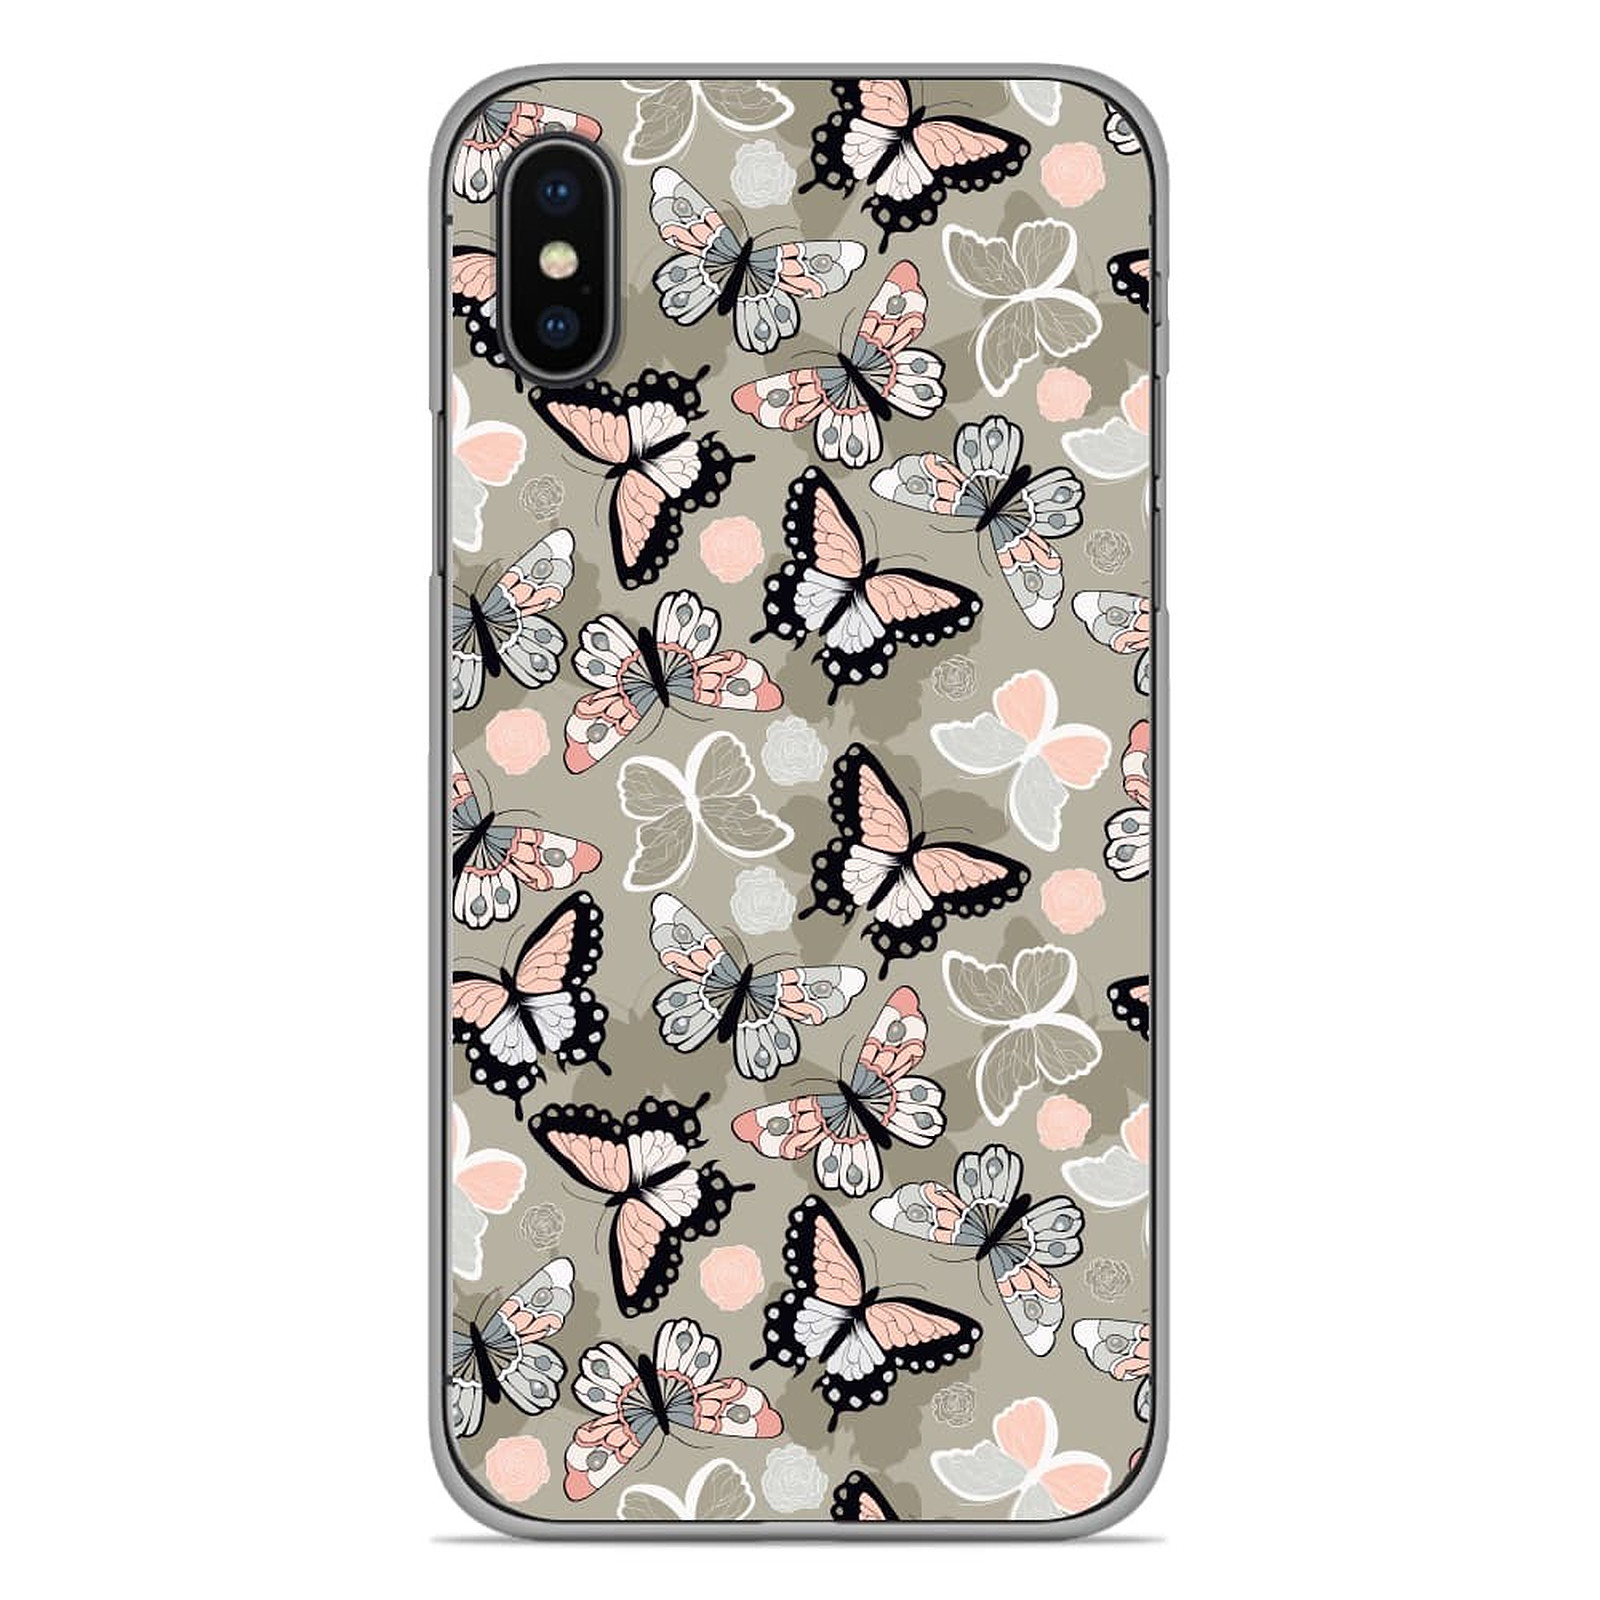 1001 Coques Coque silicone gel Apple iPhone XS Max motif Papillons Vintage - Coque telephone 1001Coques